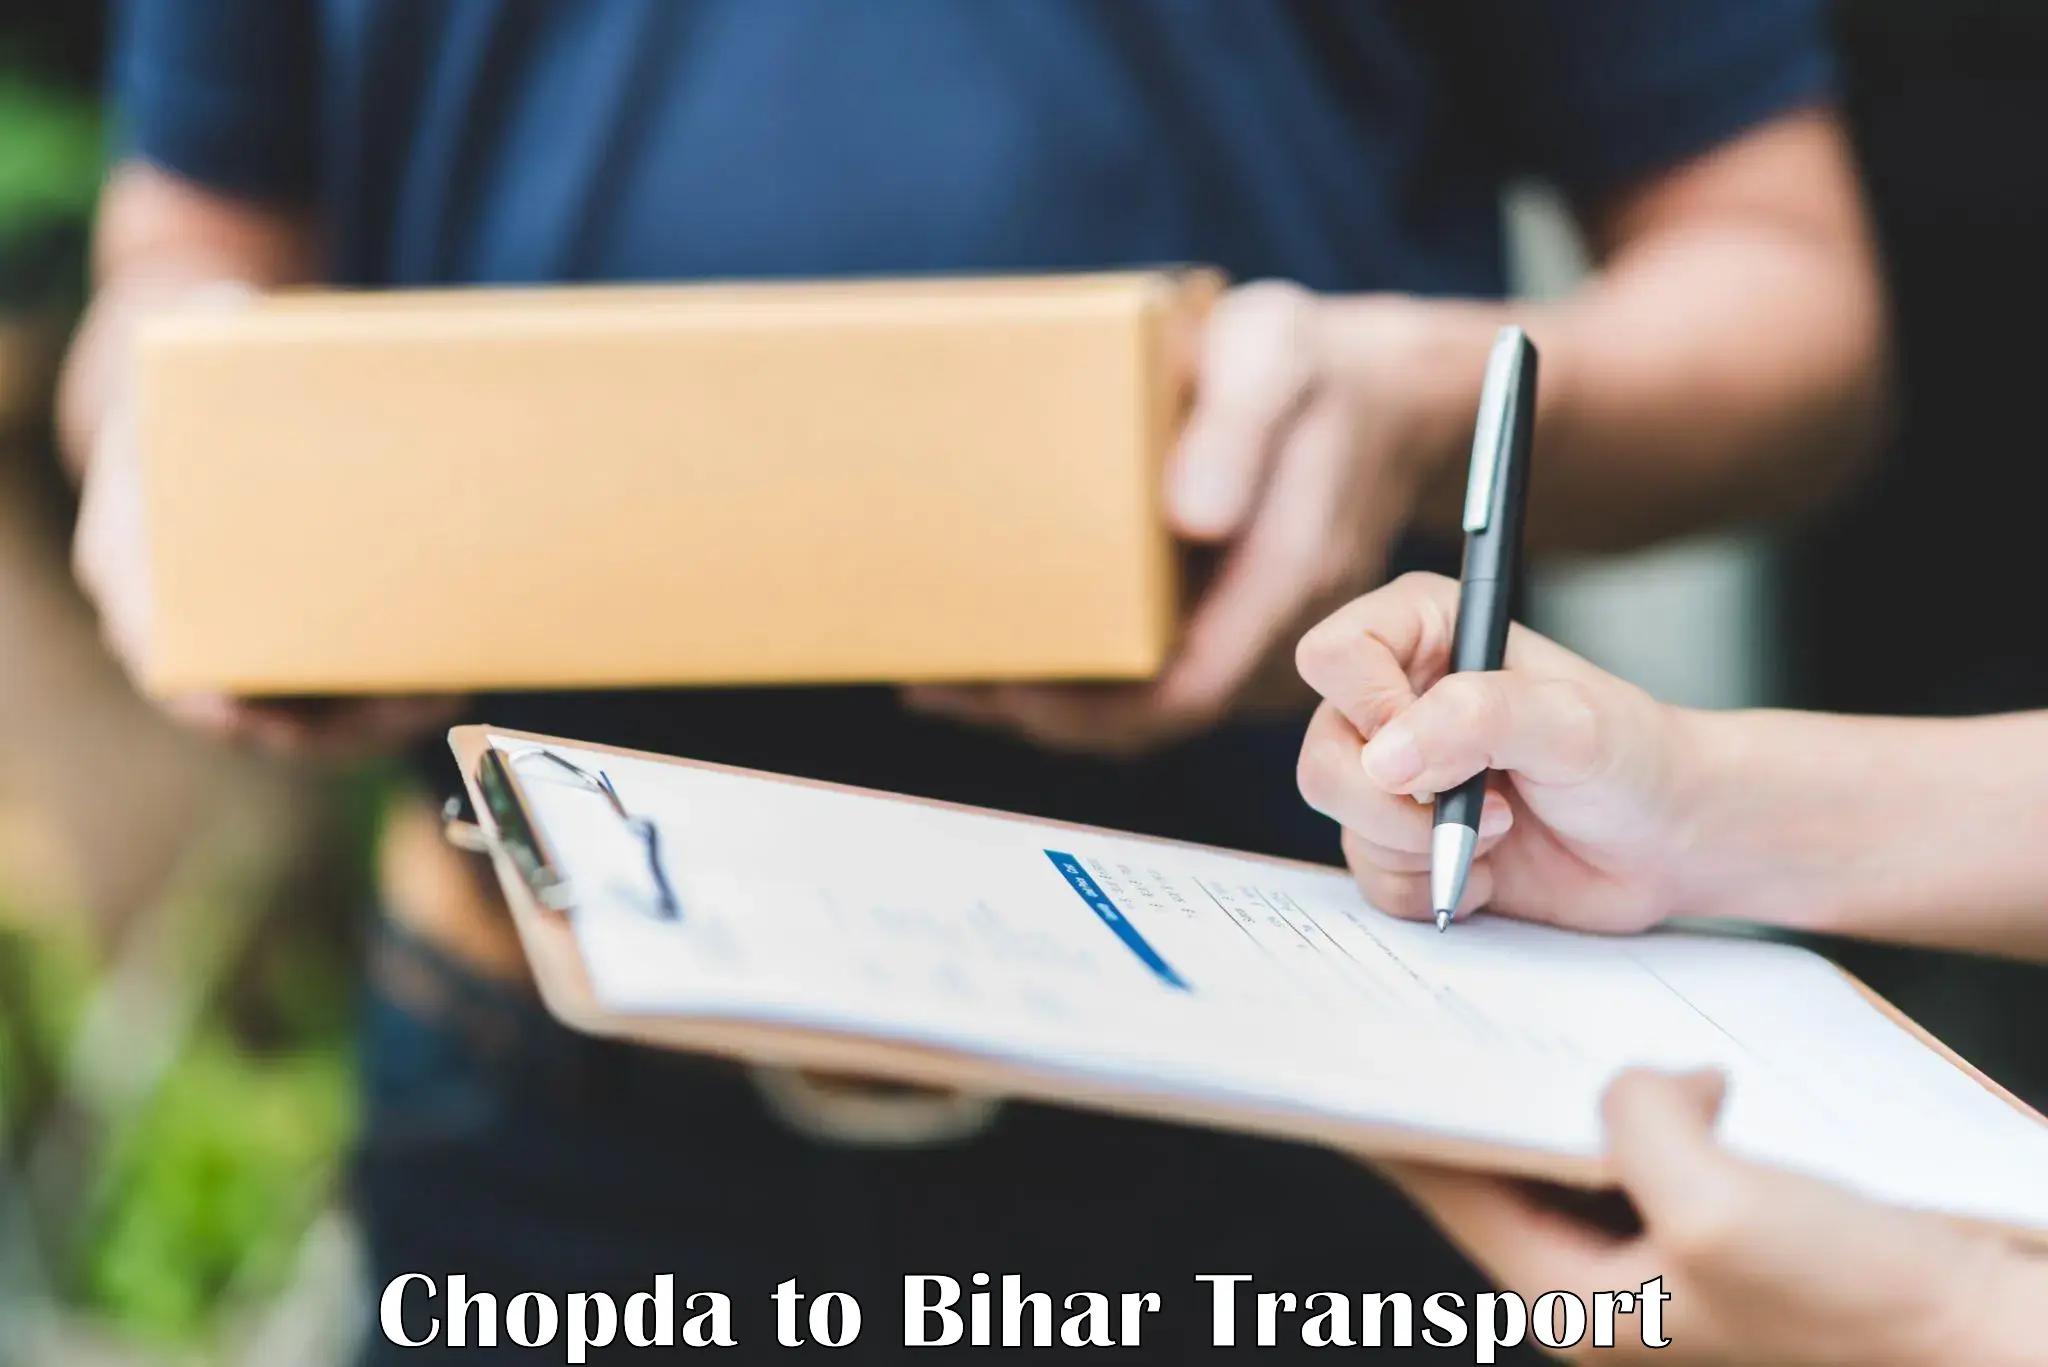 Container transport service Chopda to Bhorey